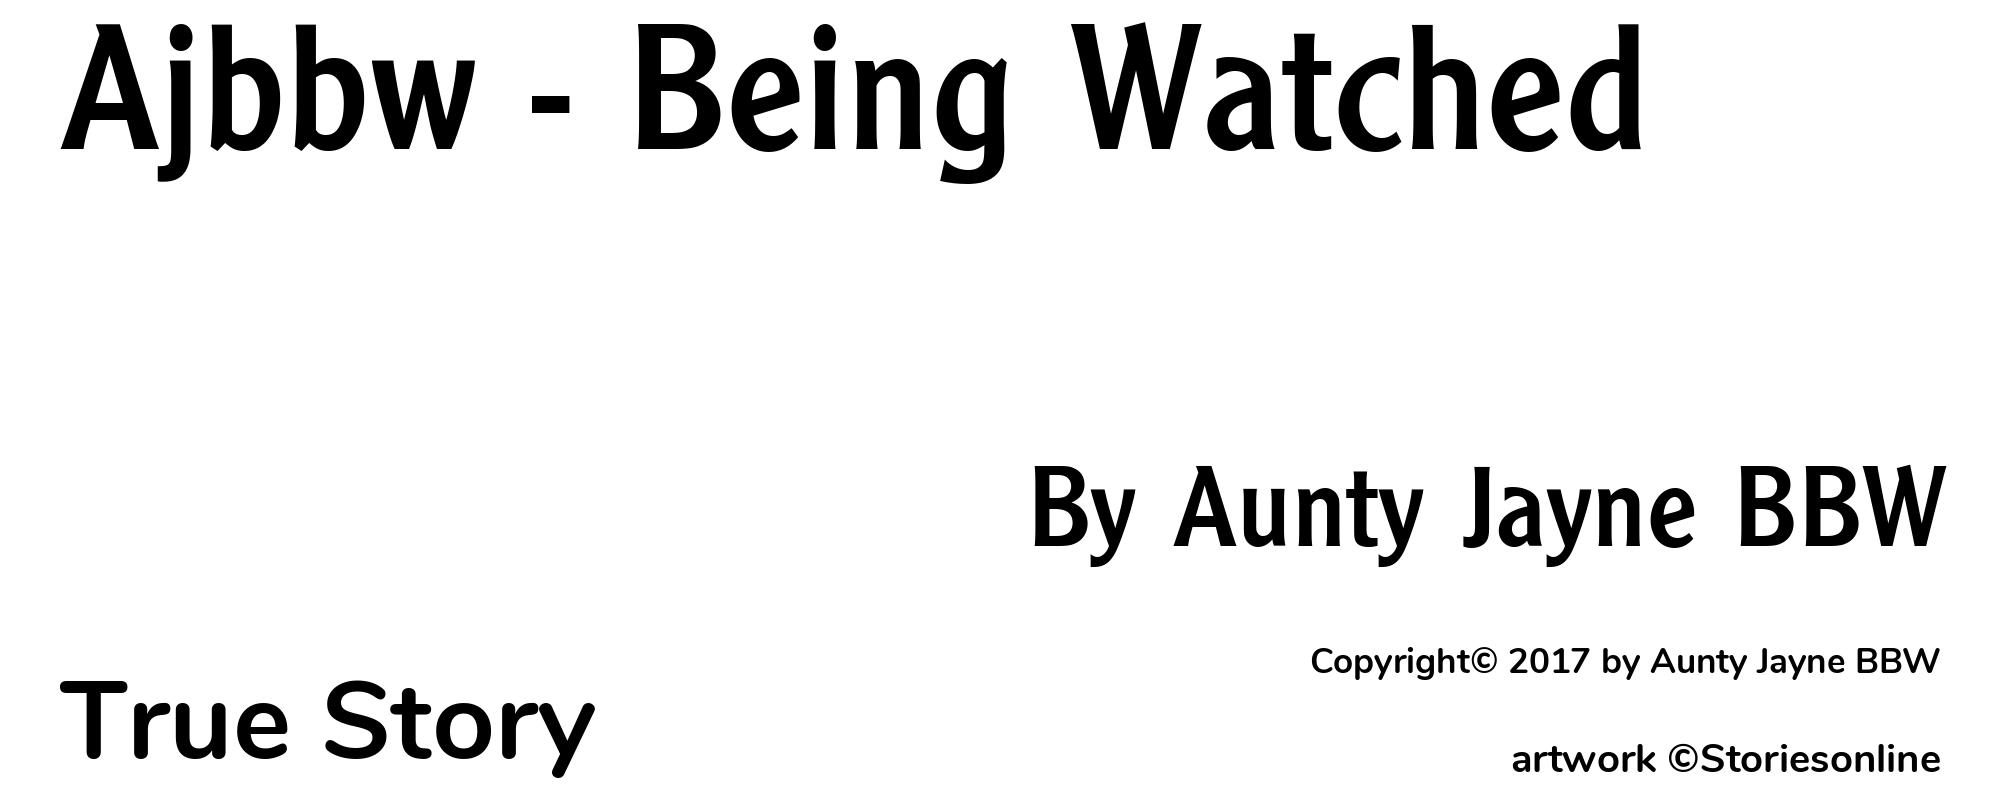 Ajbbw - Being Watched - Cover